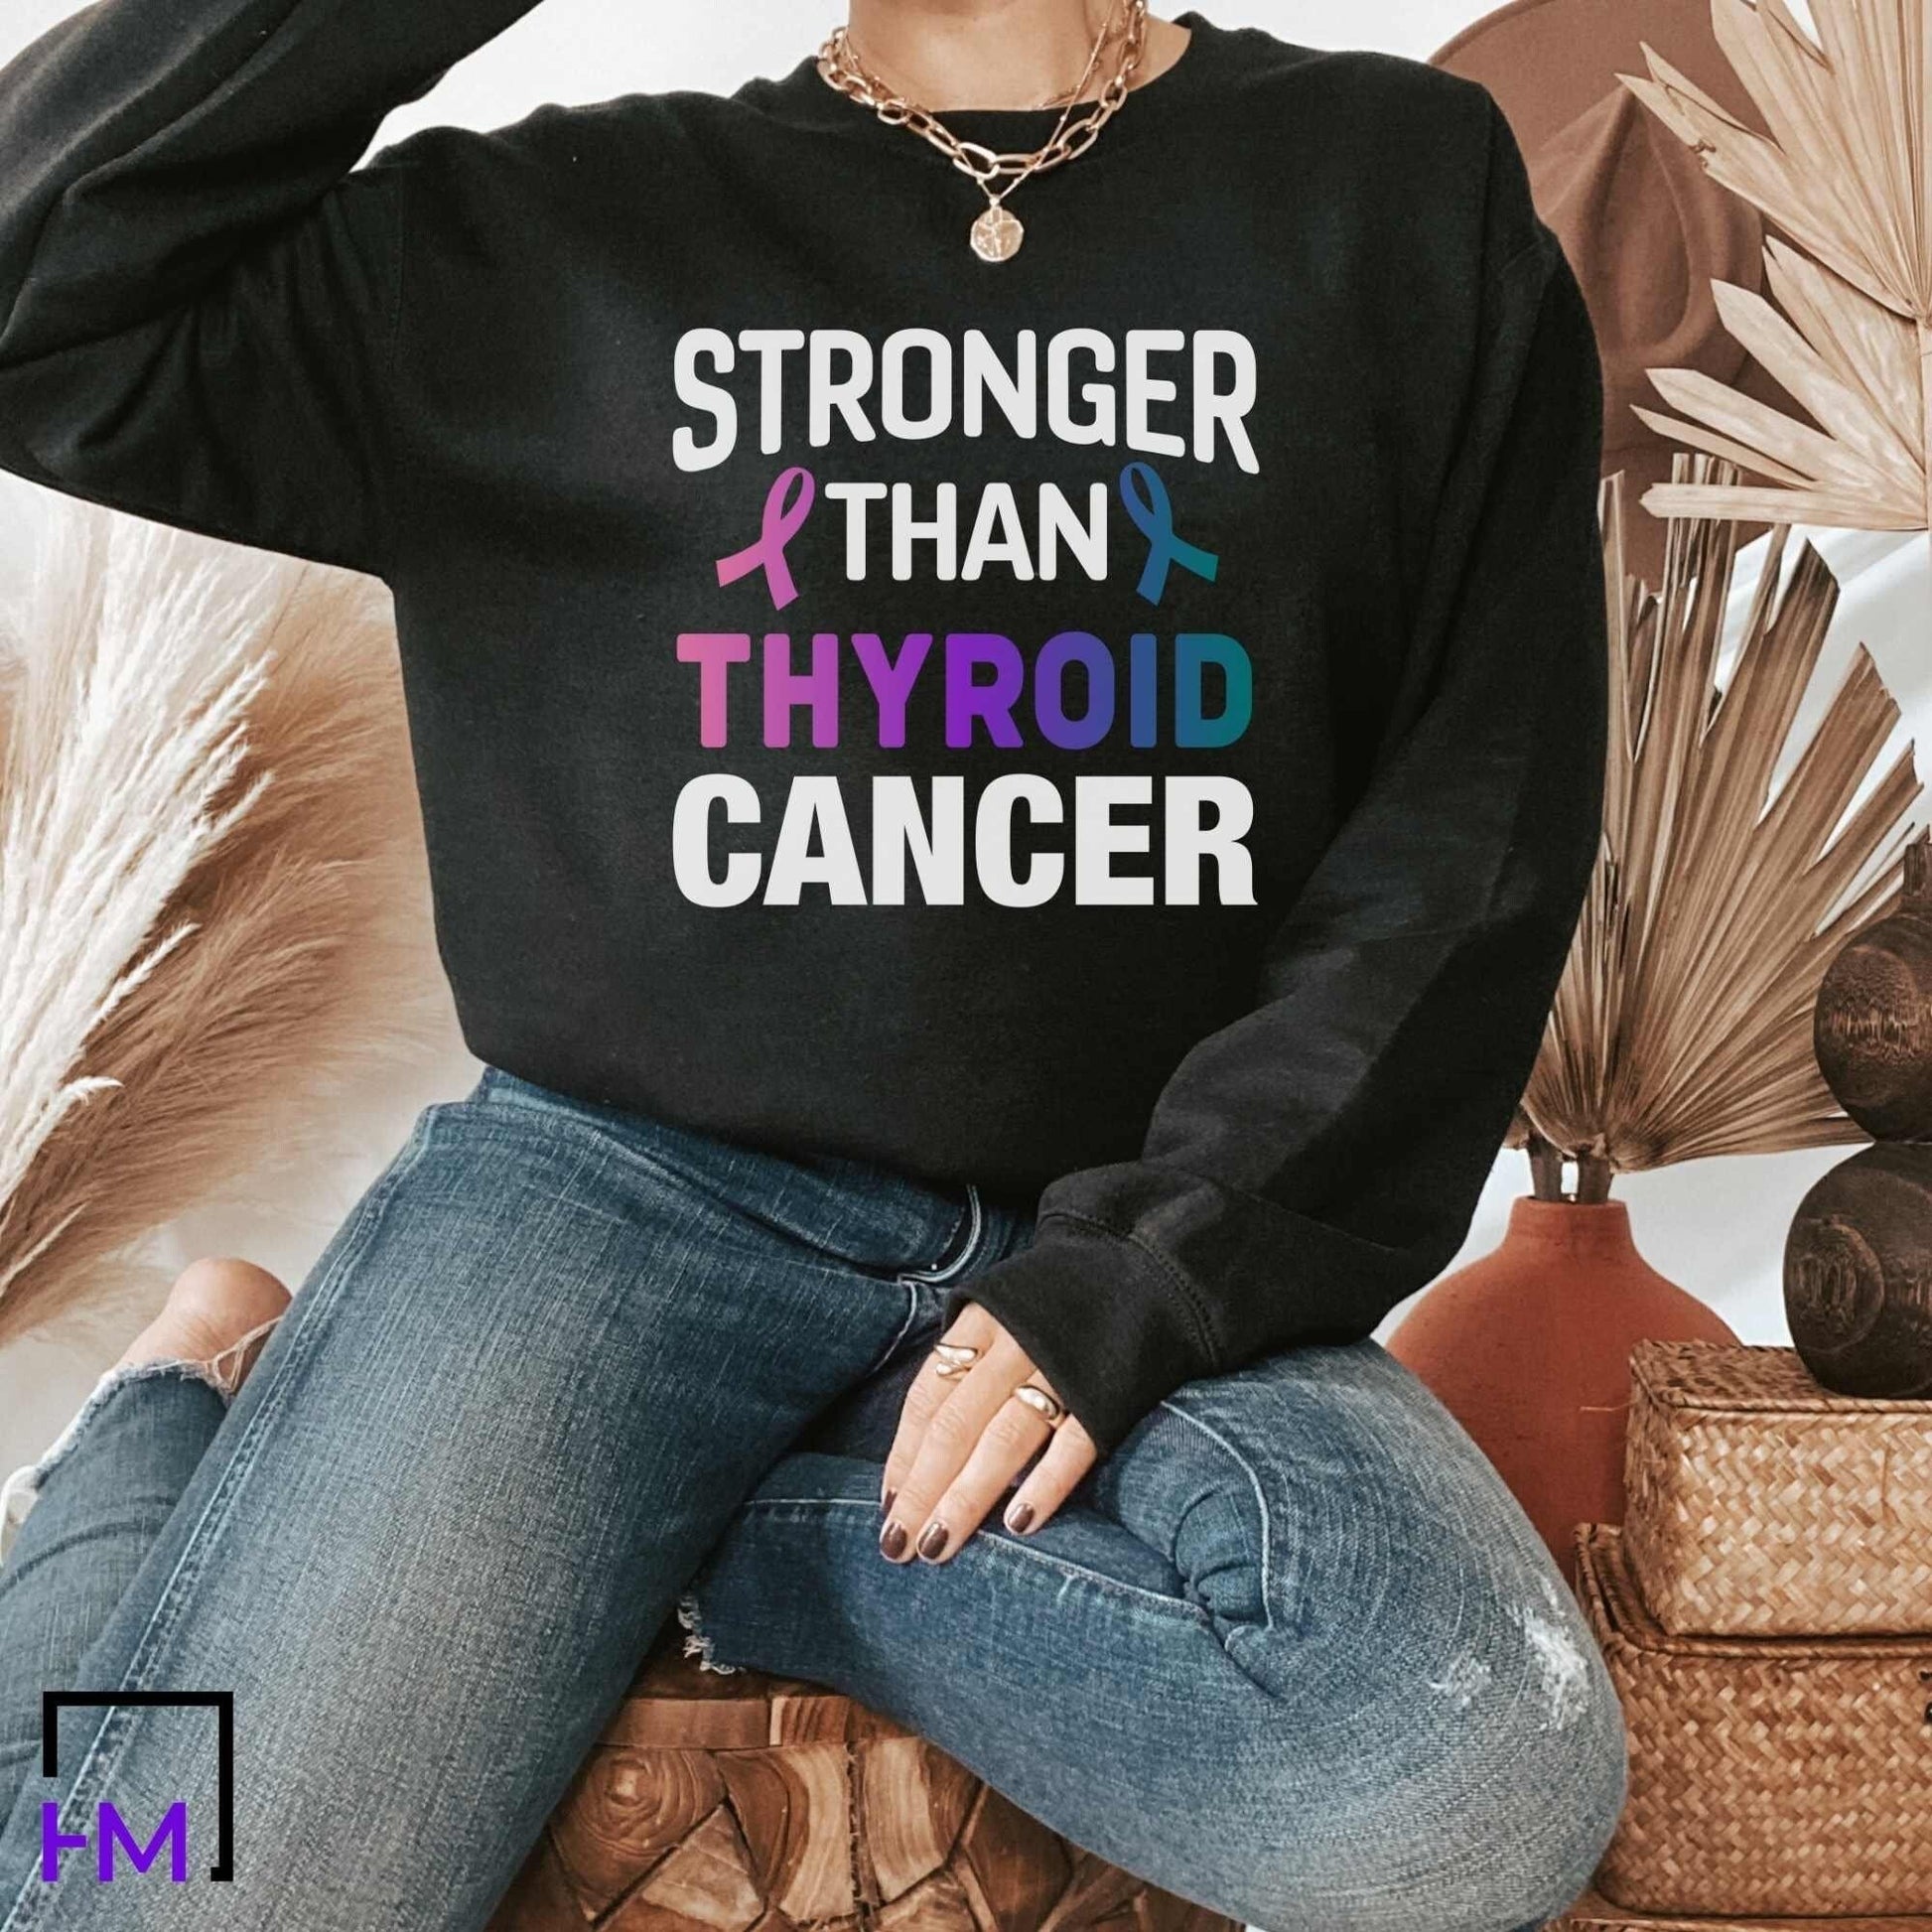 Stronger than Thyroid Cancer Shirt, Womens Cancer Fighter Tops, Survivor Gift for Her, Purple Teal Pink Ribbon, Thyroid Cancer Awareness